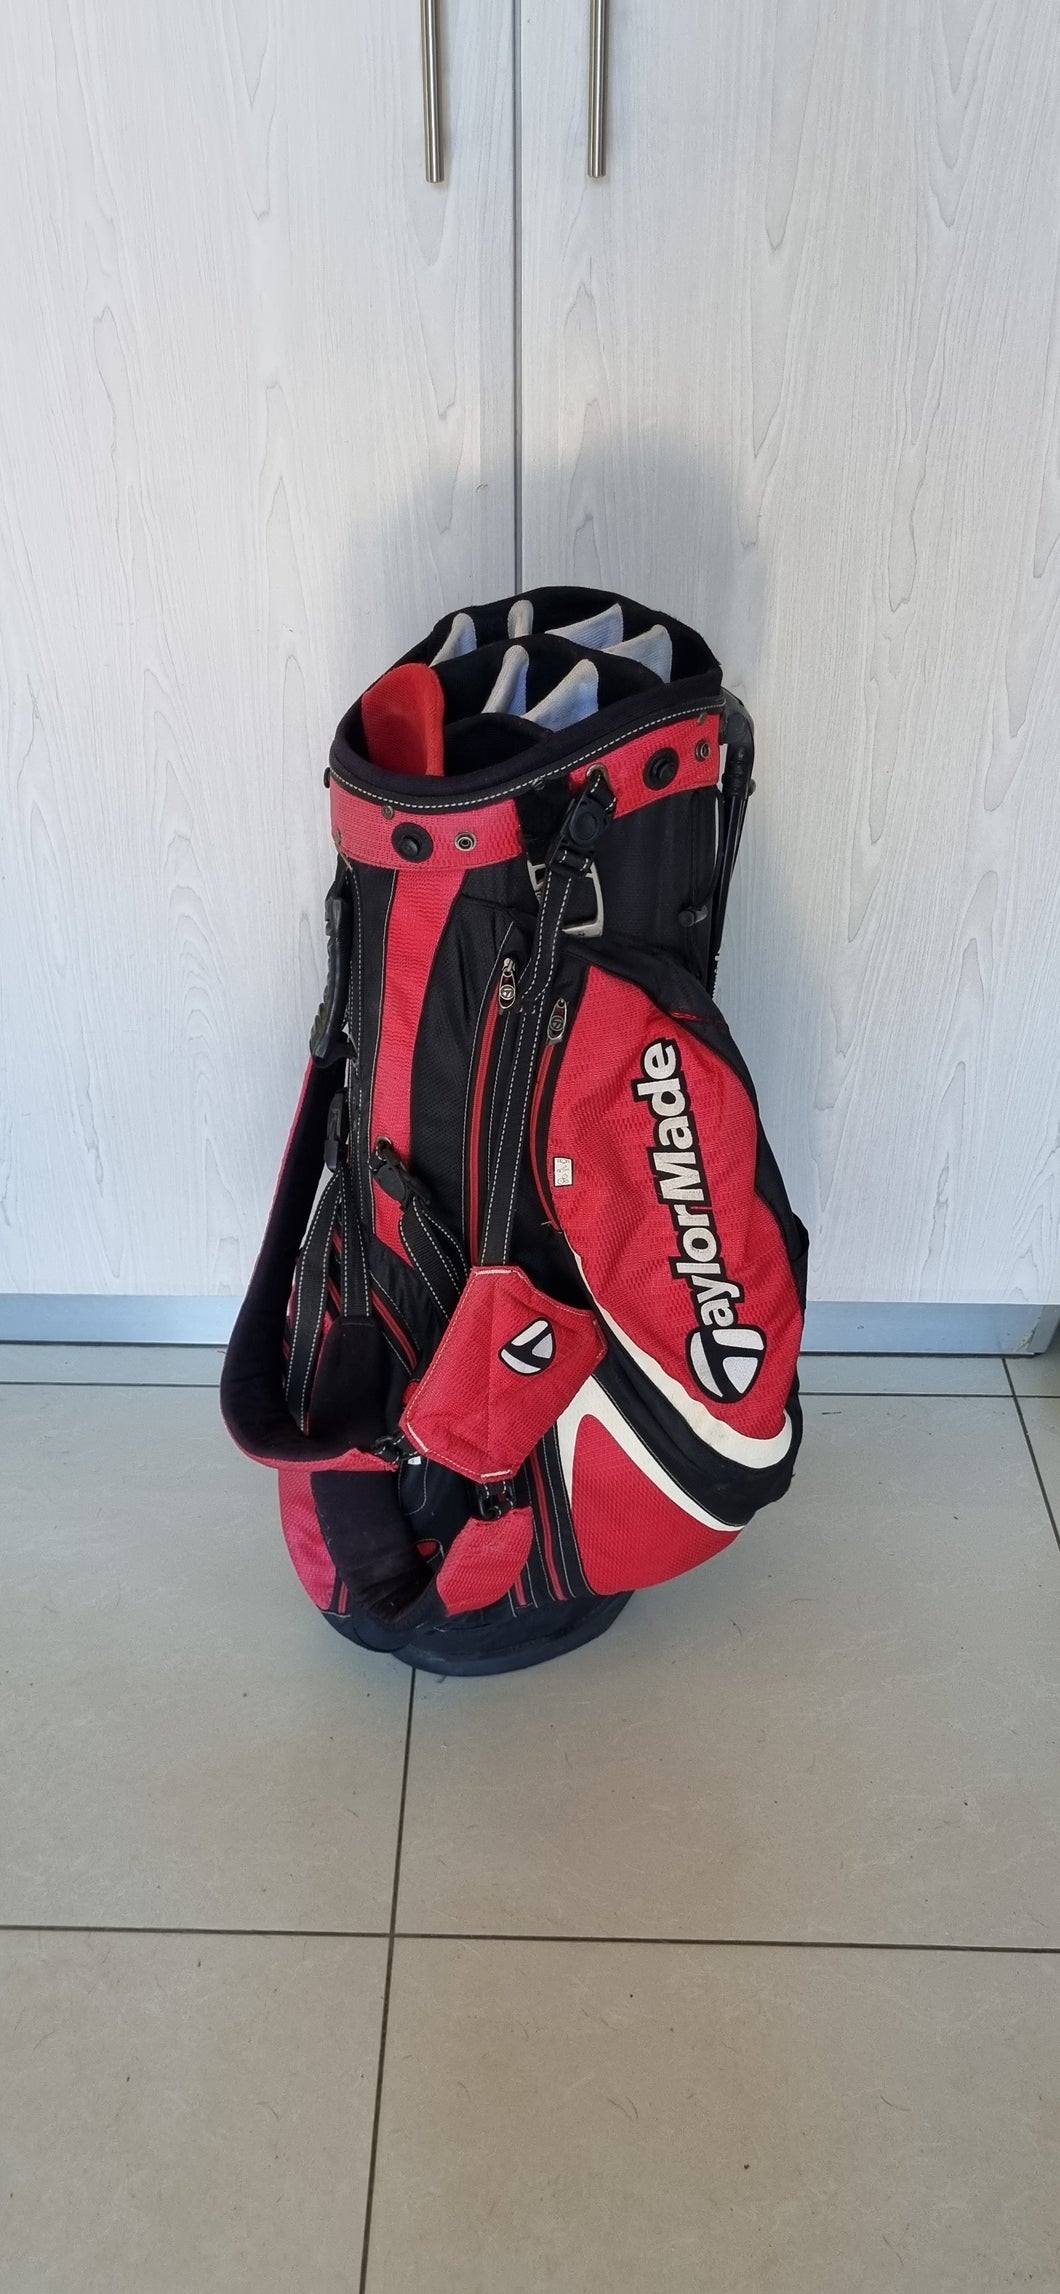 TaylorMade Golf Carry Stand Bag